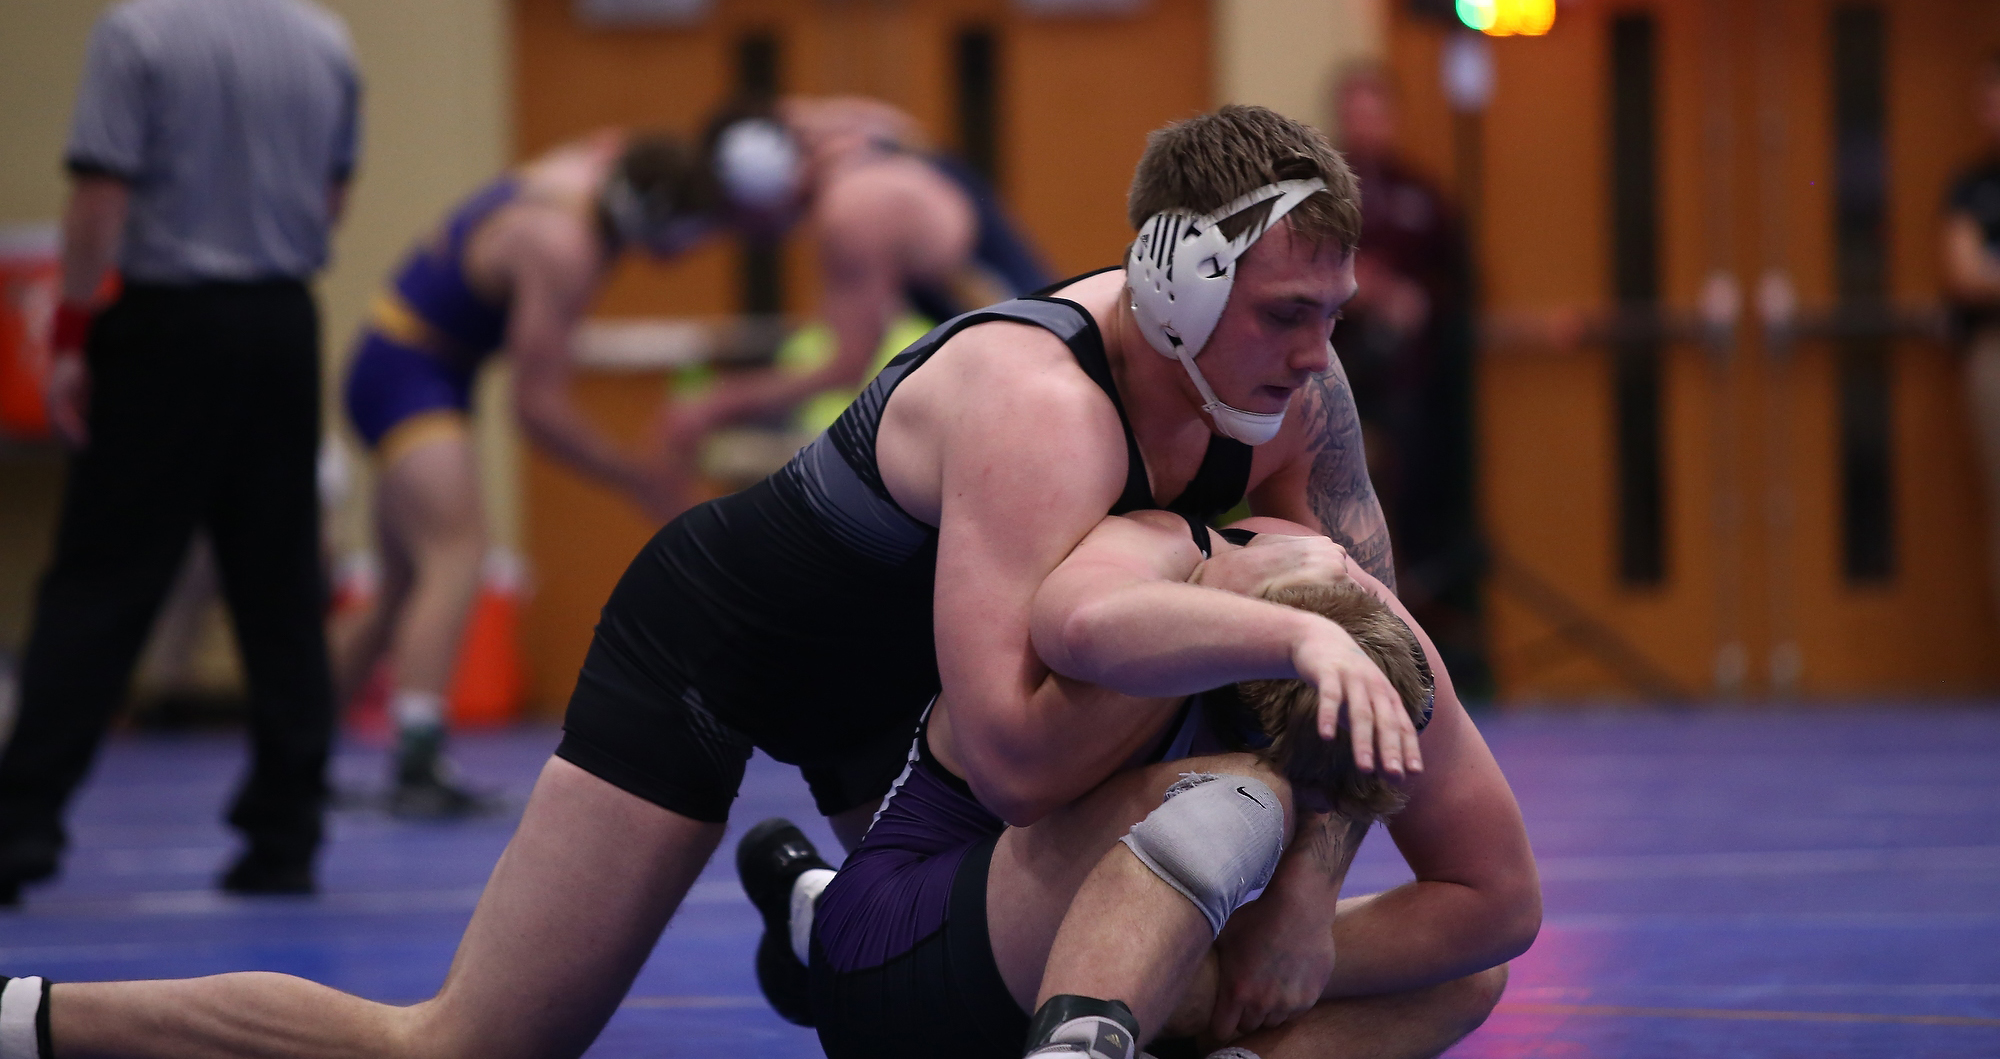 Jordan Lemcke went unbeaten in two matches at the NWCA Multi-Division National Dual Meet Championships.